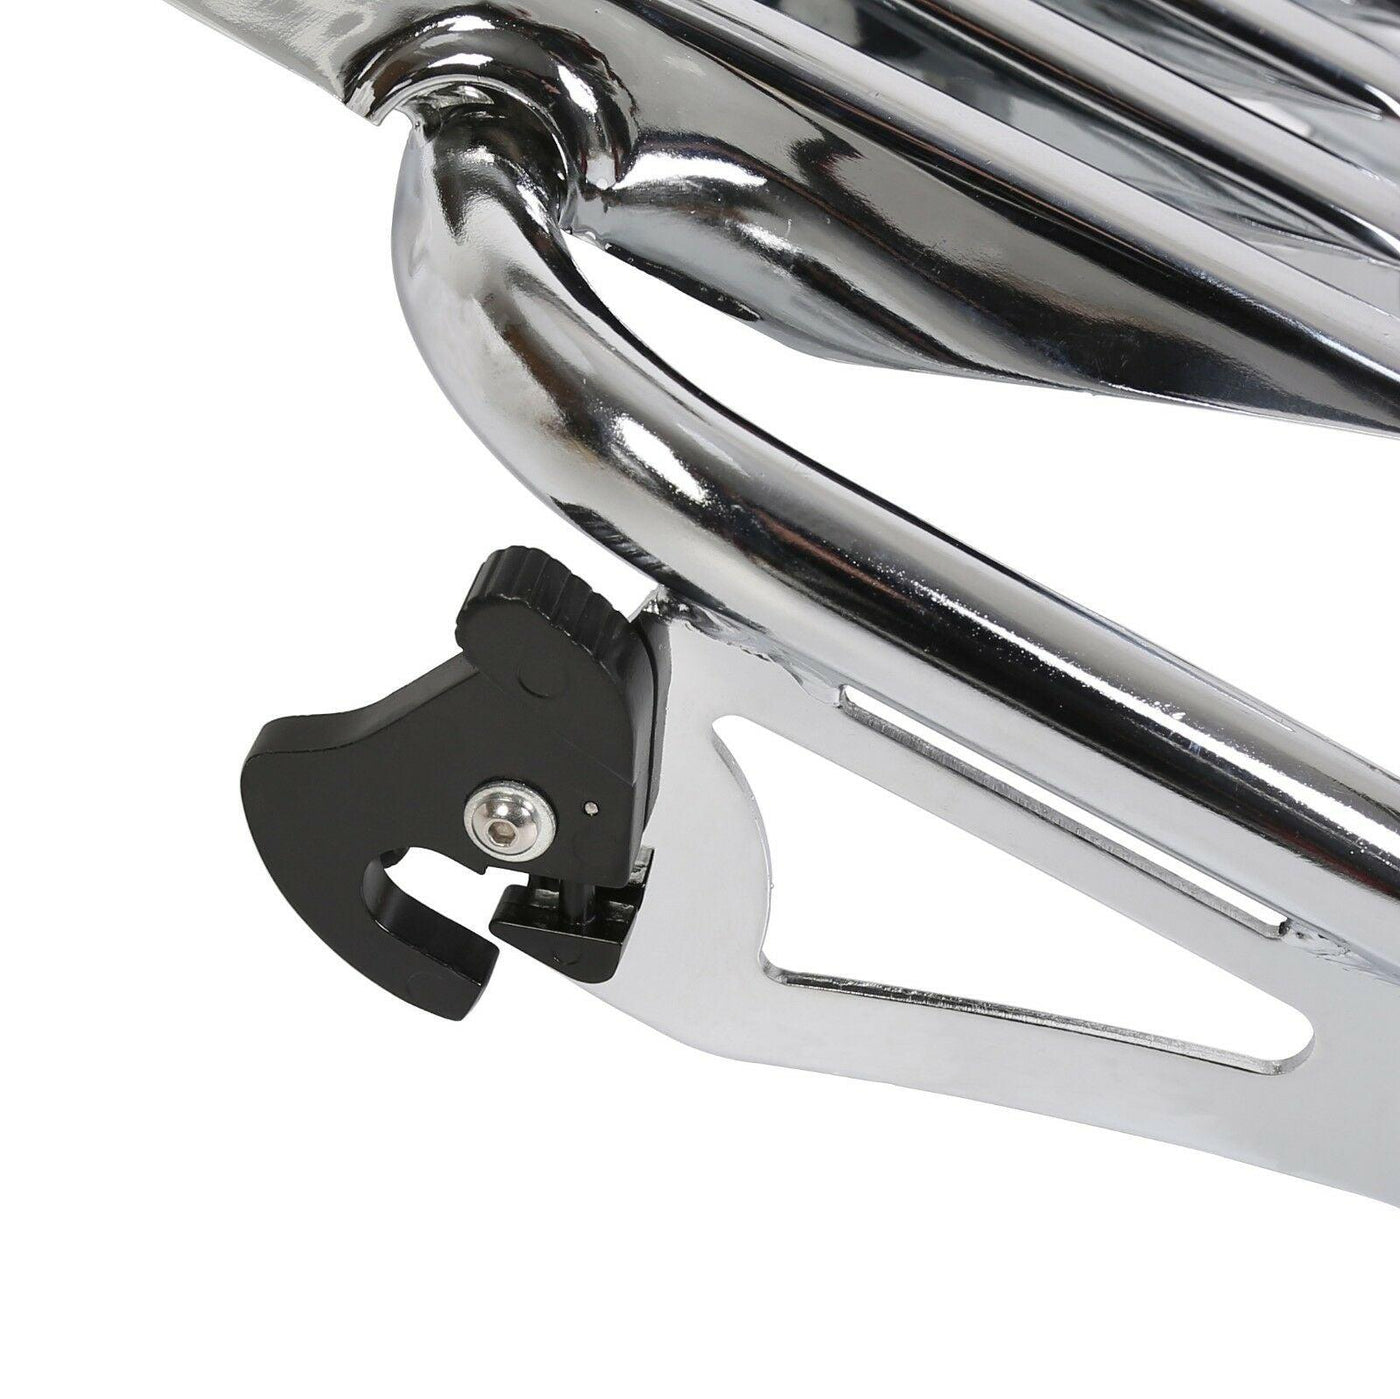 Chrome Stealth Luggage Rack Harley Touring Street Glide Road King 2009-2021 - Moto Life Products